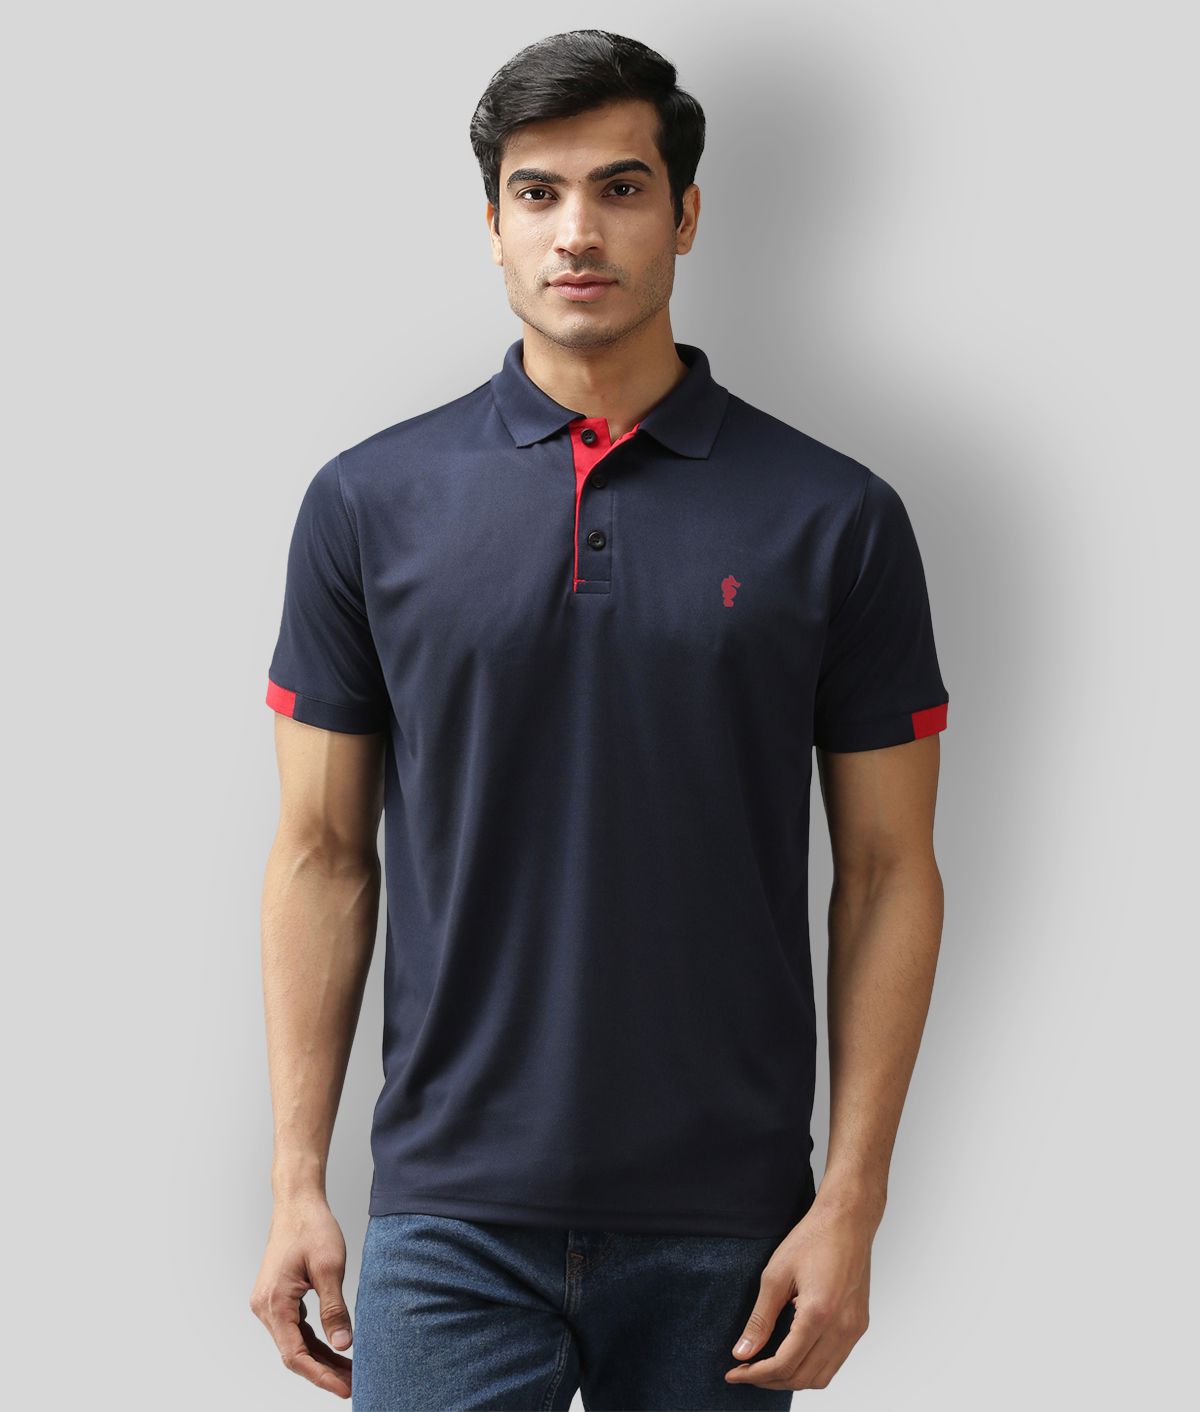     			EPPE - Navy Polyester Regular Fit Men's Sports Polo T-Shirt ( Pack of 1 )